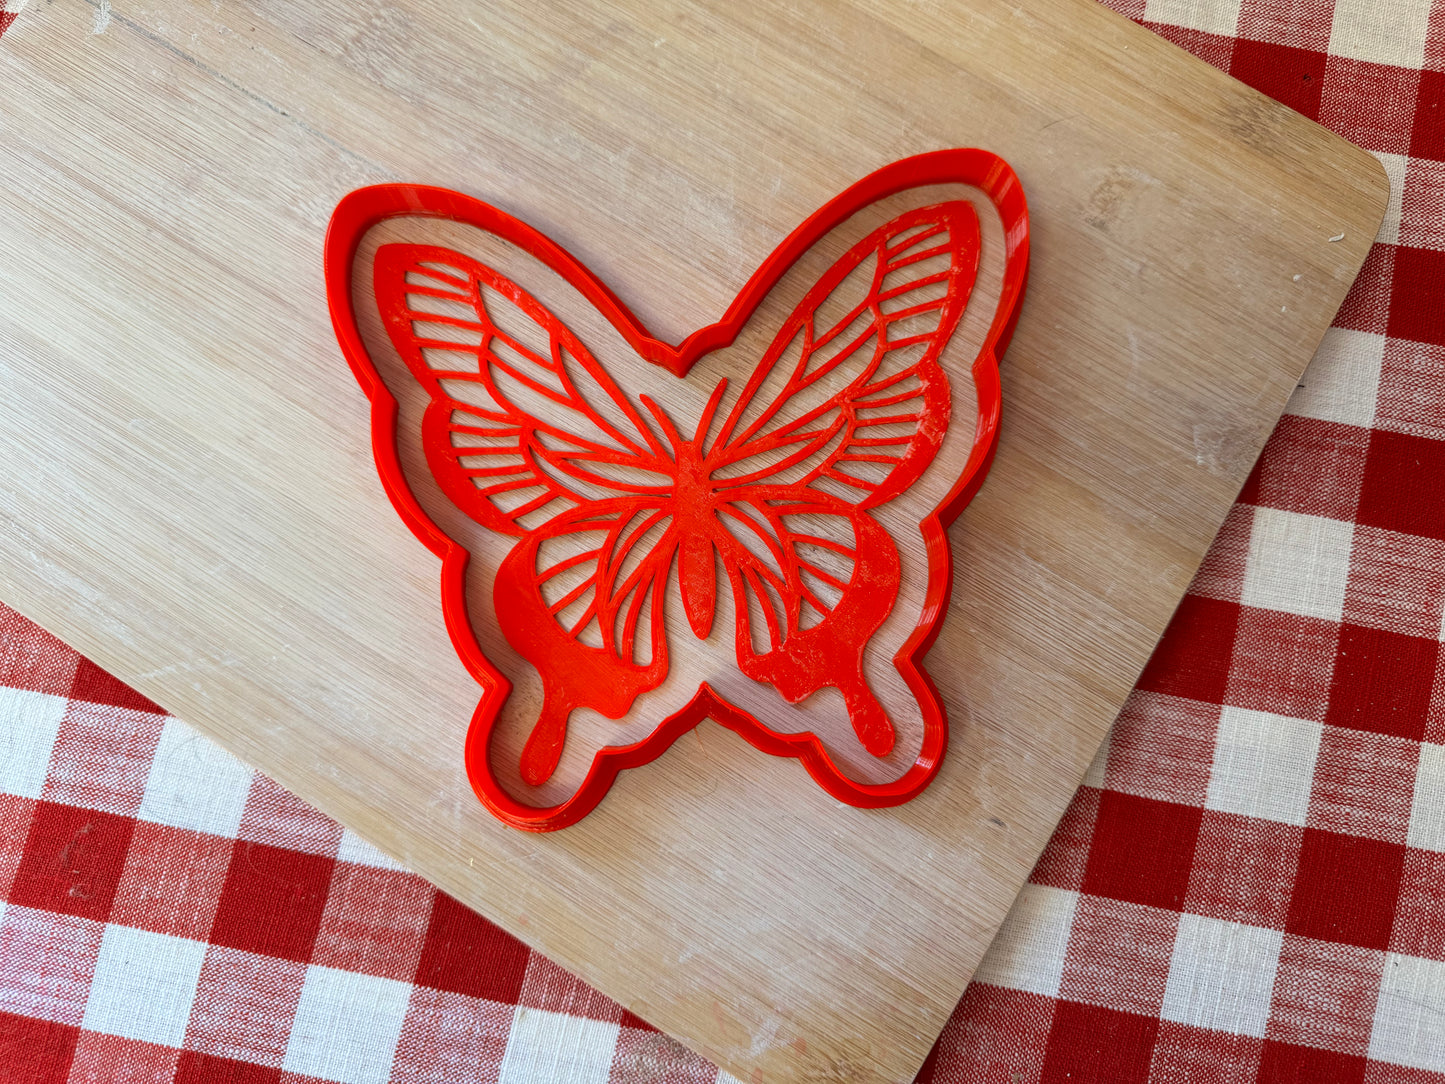 Butterfly design, pottery stamp or stencil w/ optional cutter - plastic 3D printed, multiple sizes